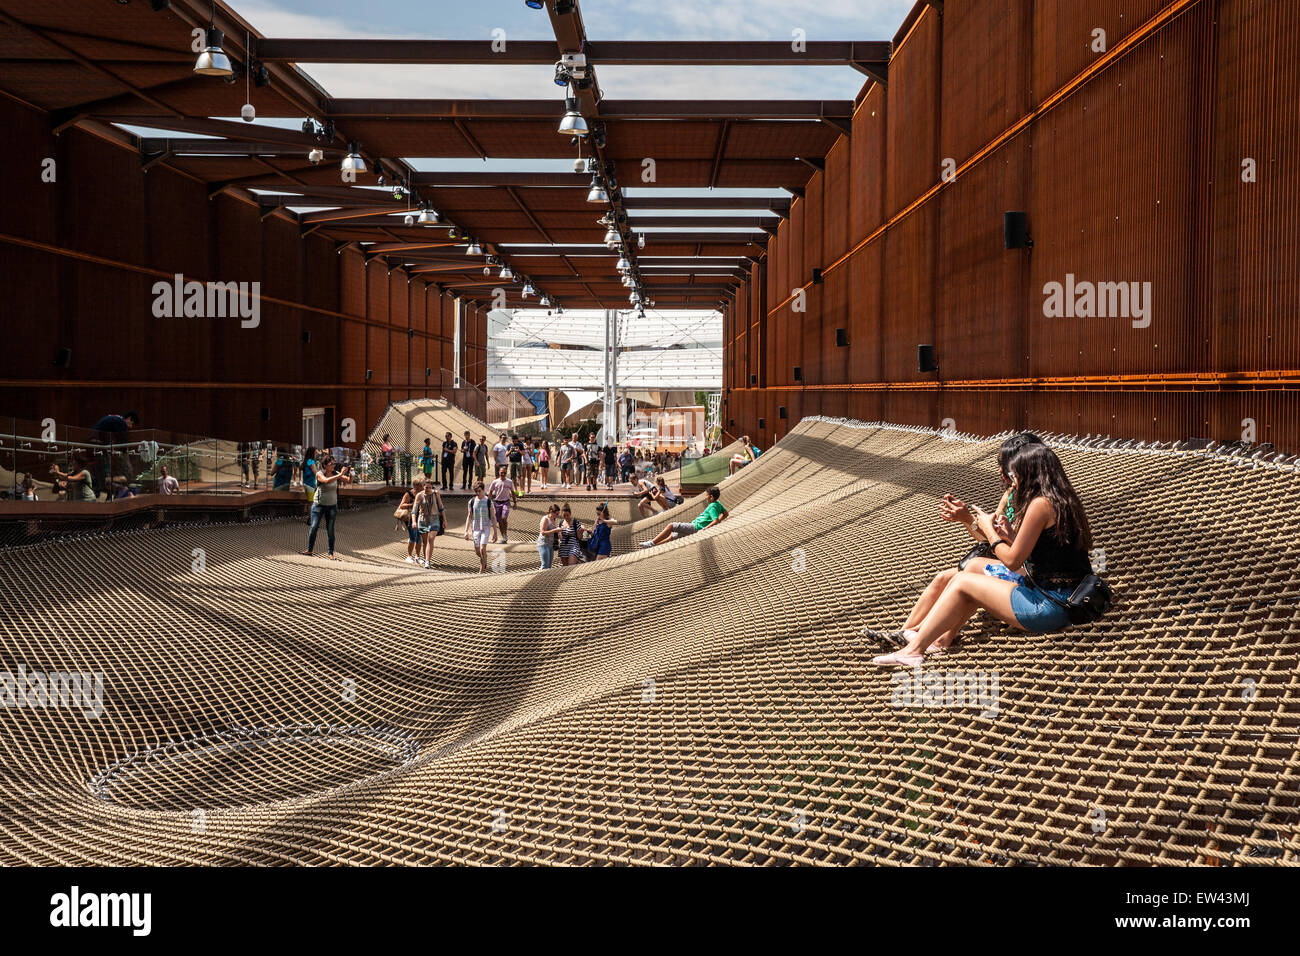 Milan, Expo 2015, Brazil pavilion, food, architecture, structure, people, structure, Stock Photo